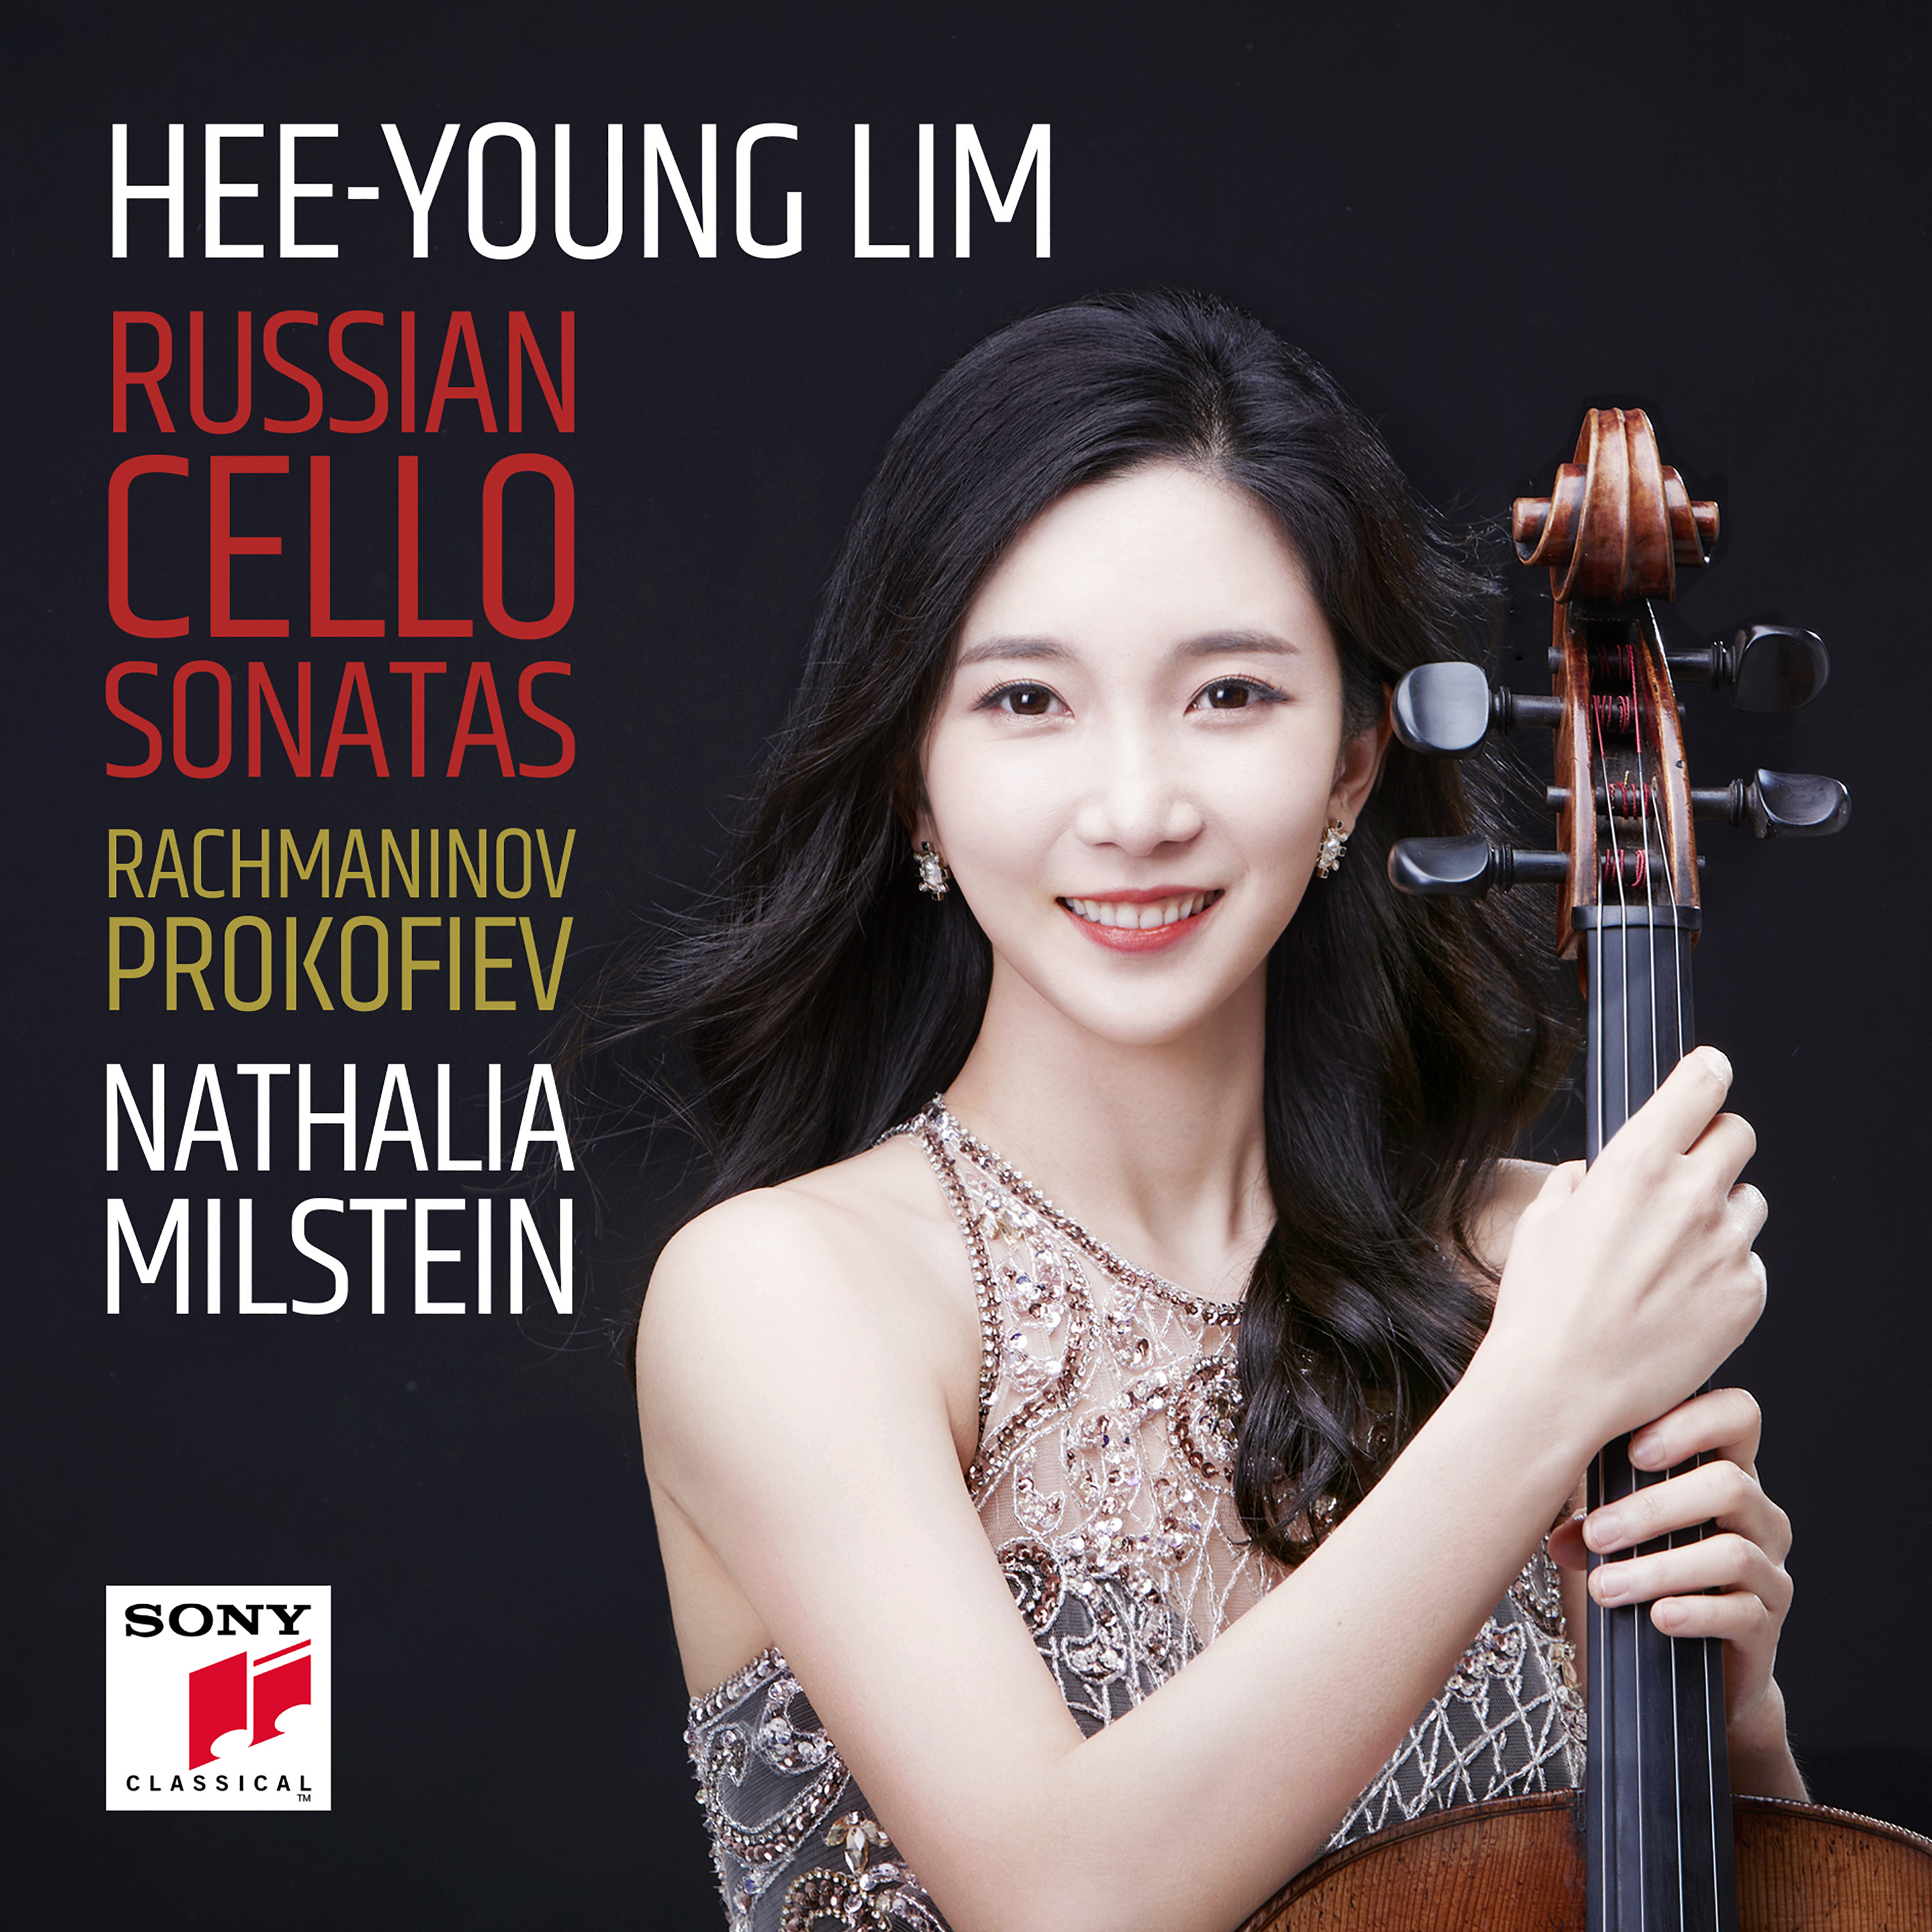 Planet Hugill: Hee-Young Lim: the young Korean cellist in